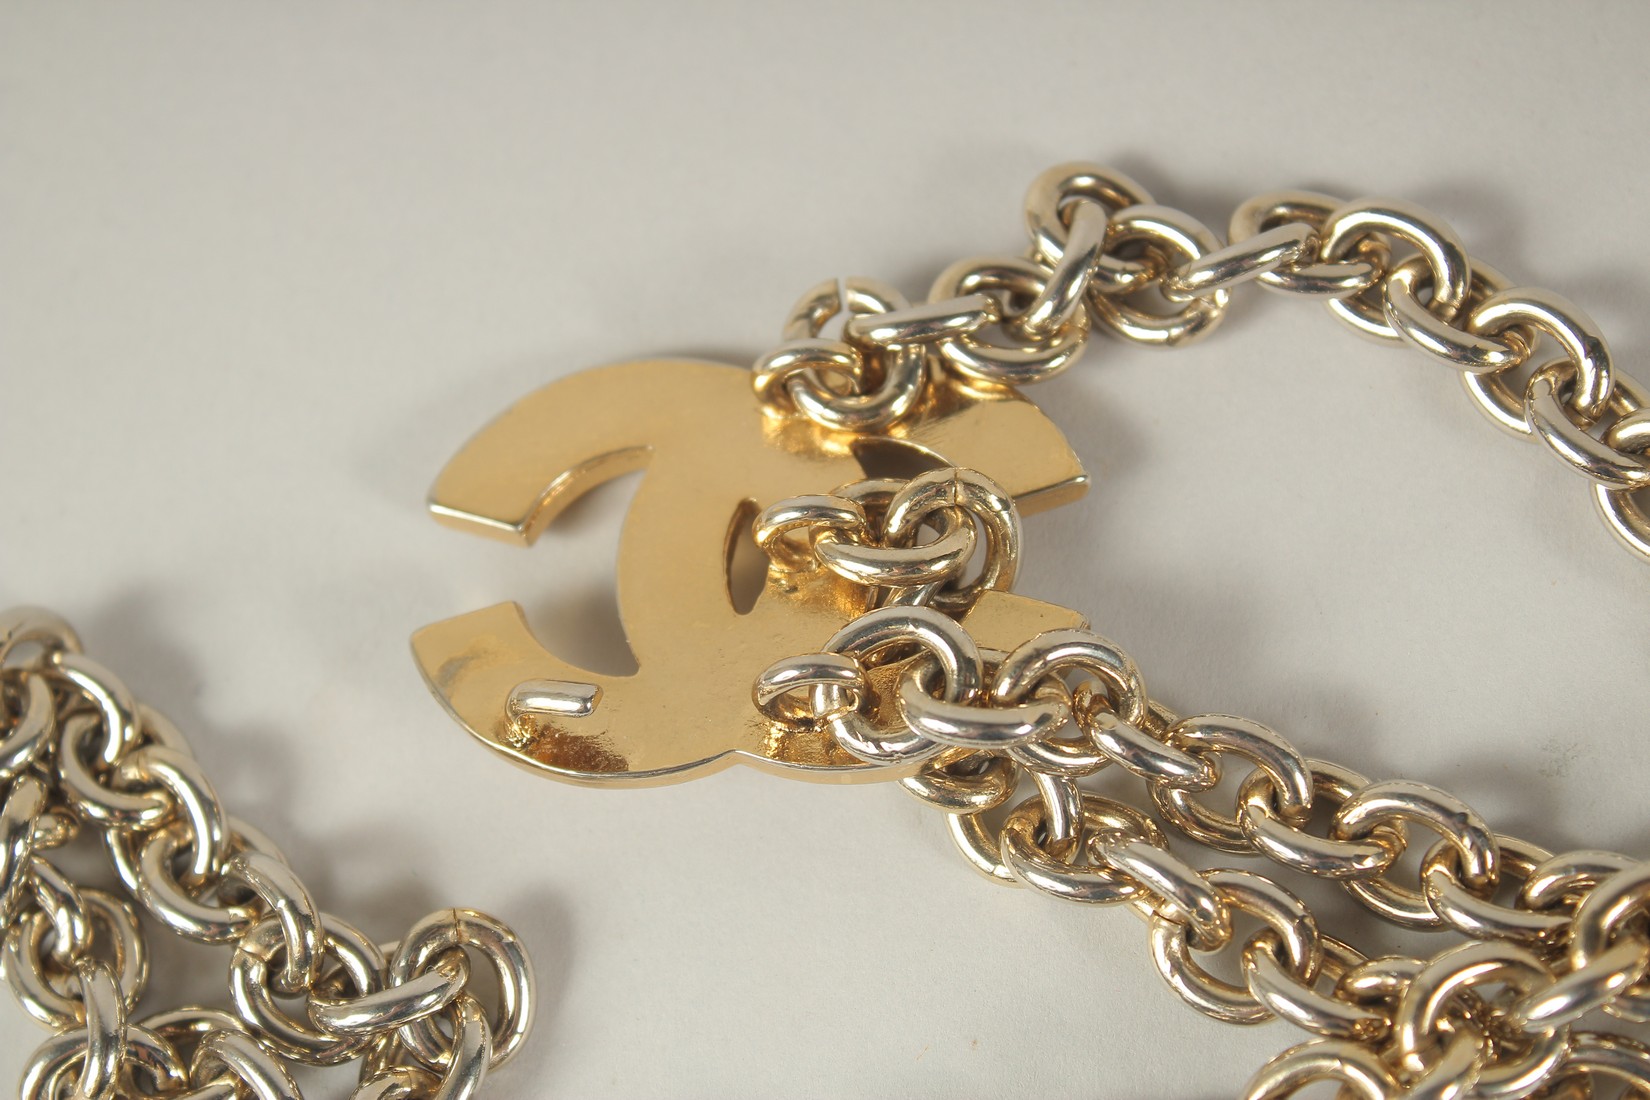 A LONG CHANEL GILT BELT with pendant and tie, double C emblem. 110cms long. - Image 6 of 9